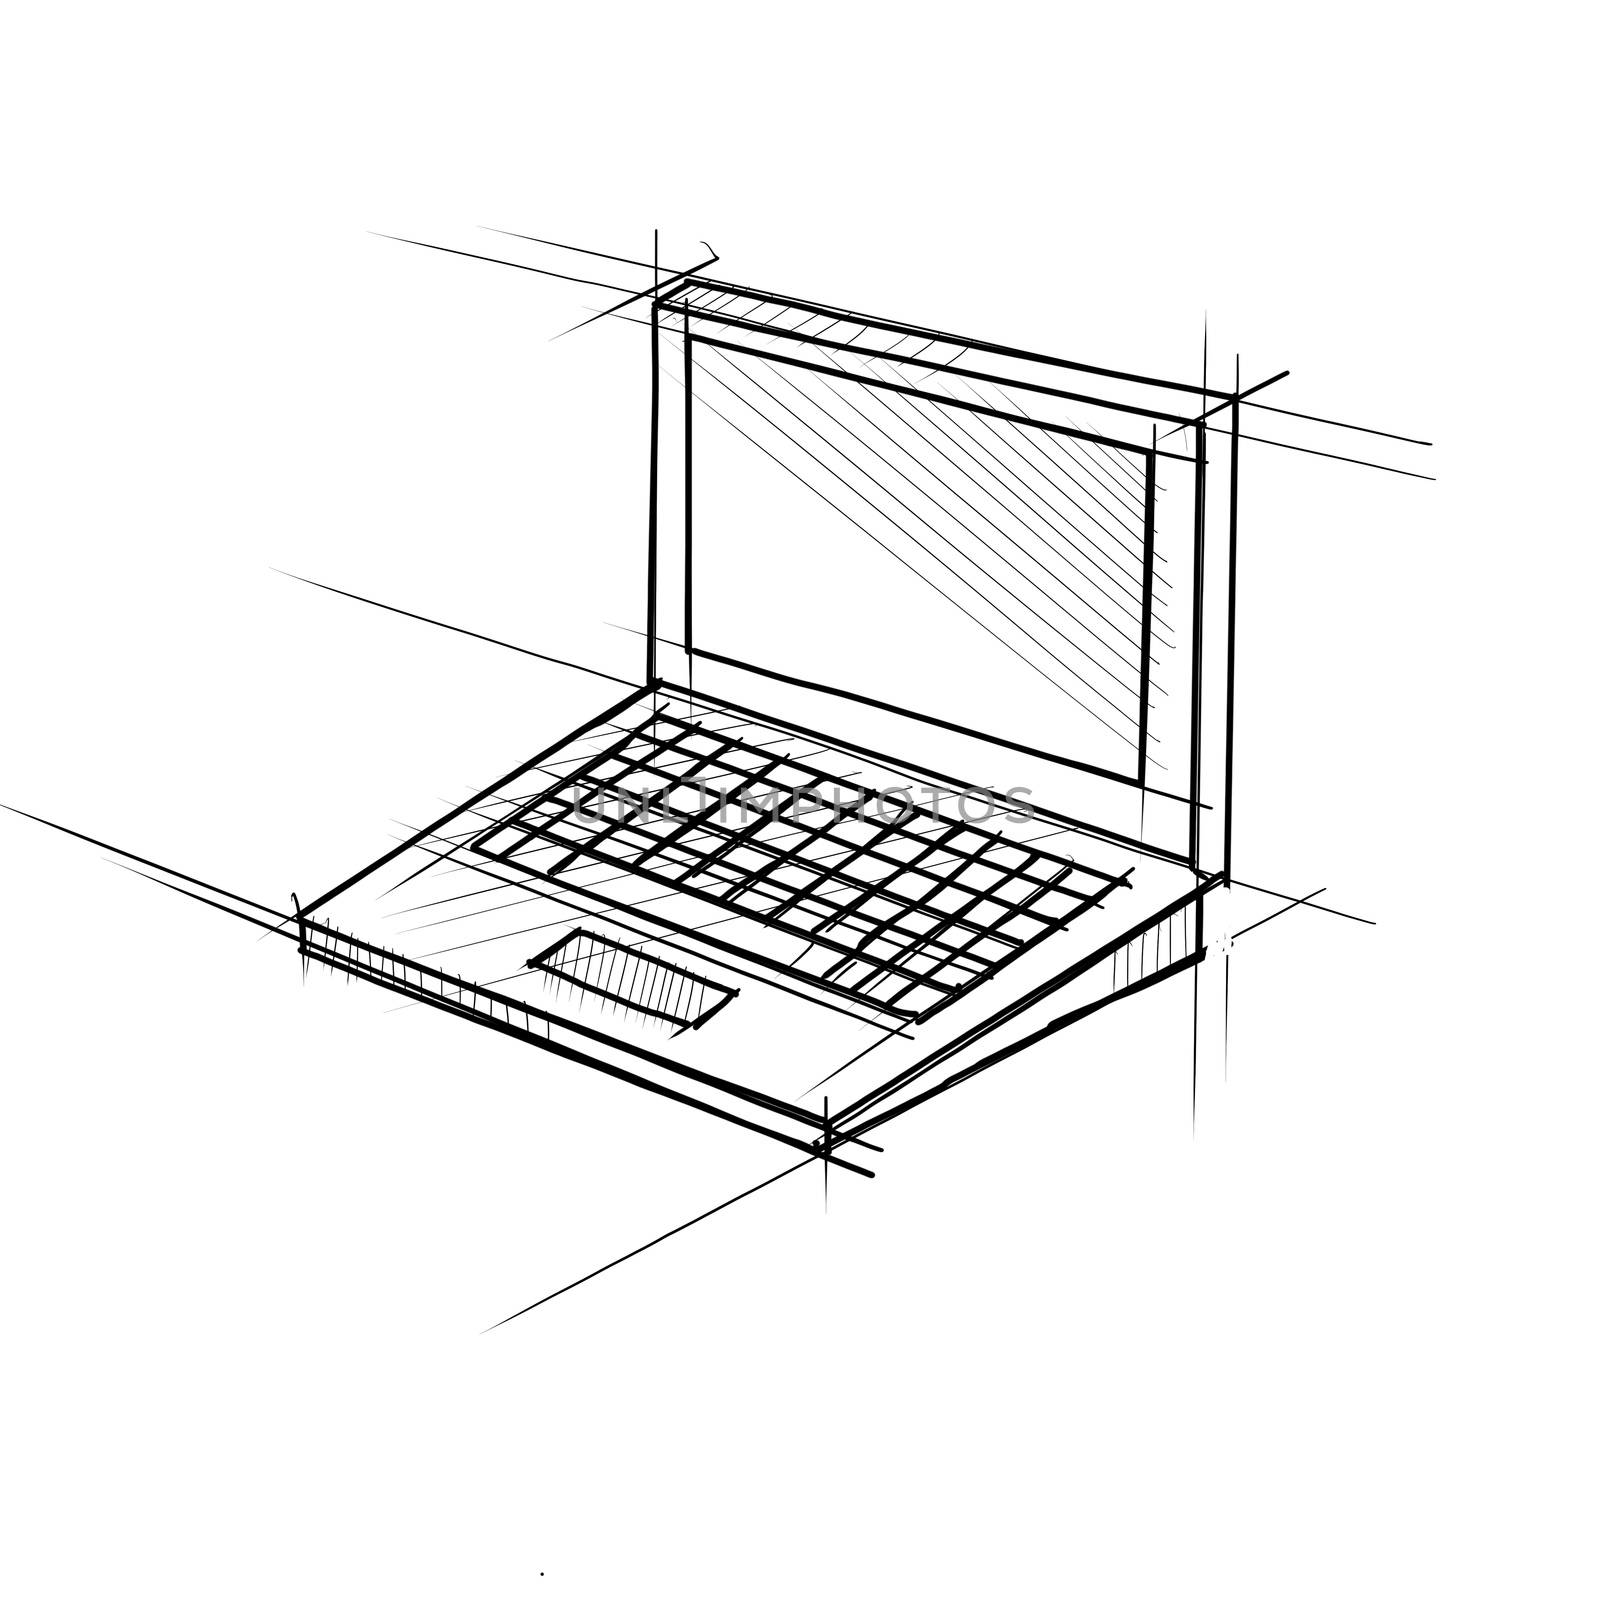 Technical Drawing sketch style illustration of a laptop computer on screen on isolated white background.